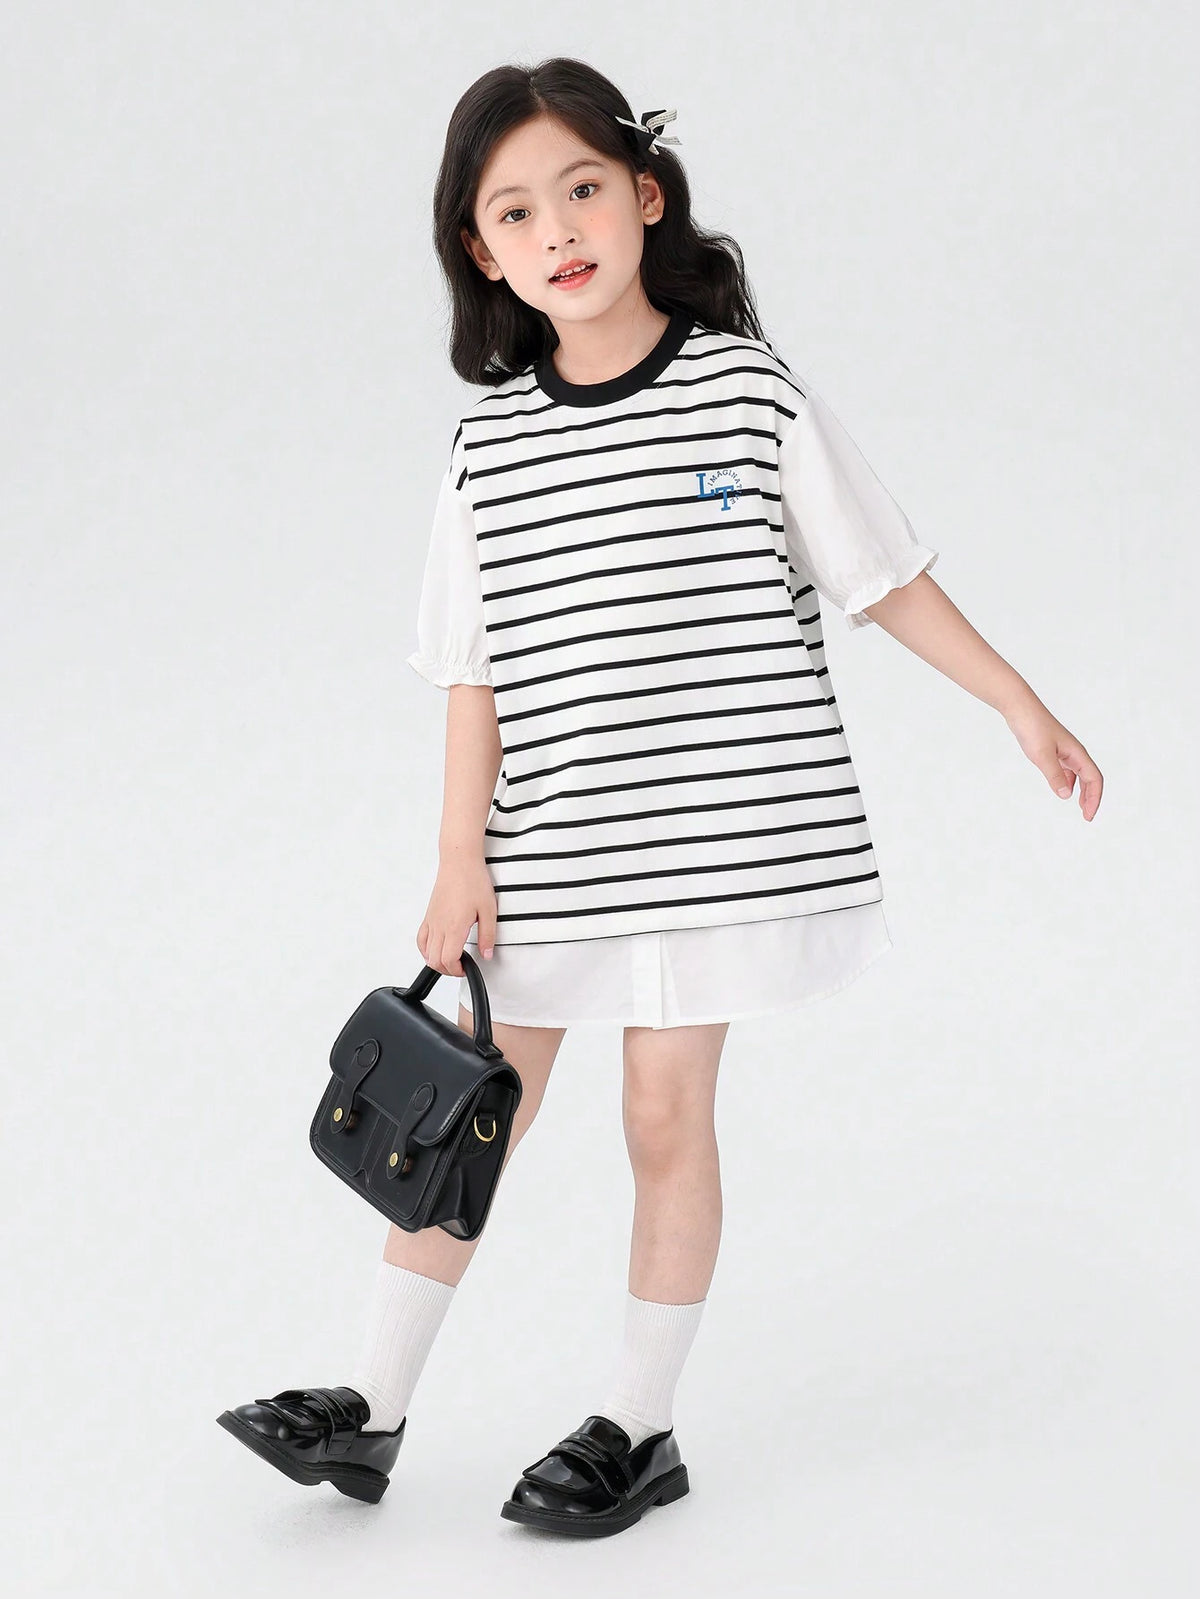 Yo2 In 1 T-Shirt Dress, Summer 2024 New Kids Striped Shirt Dress, Breathable Summer Outfit